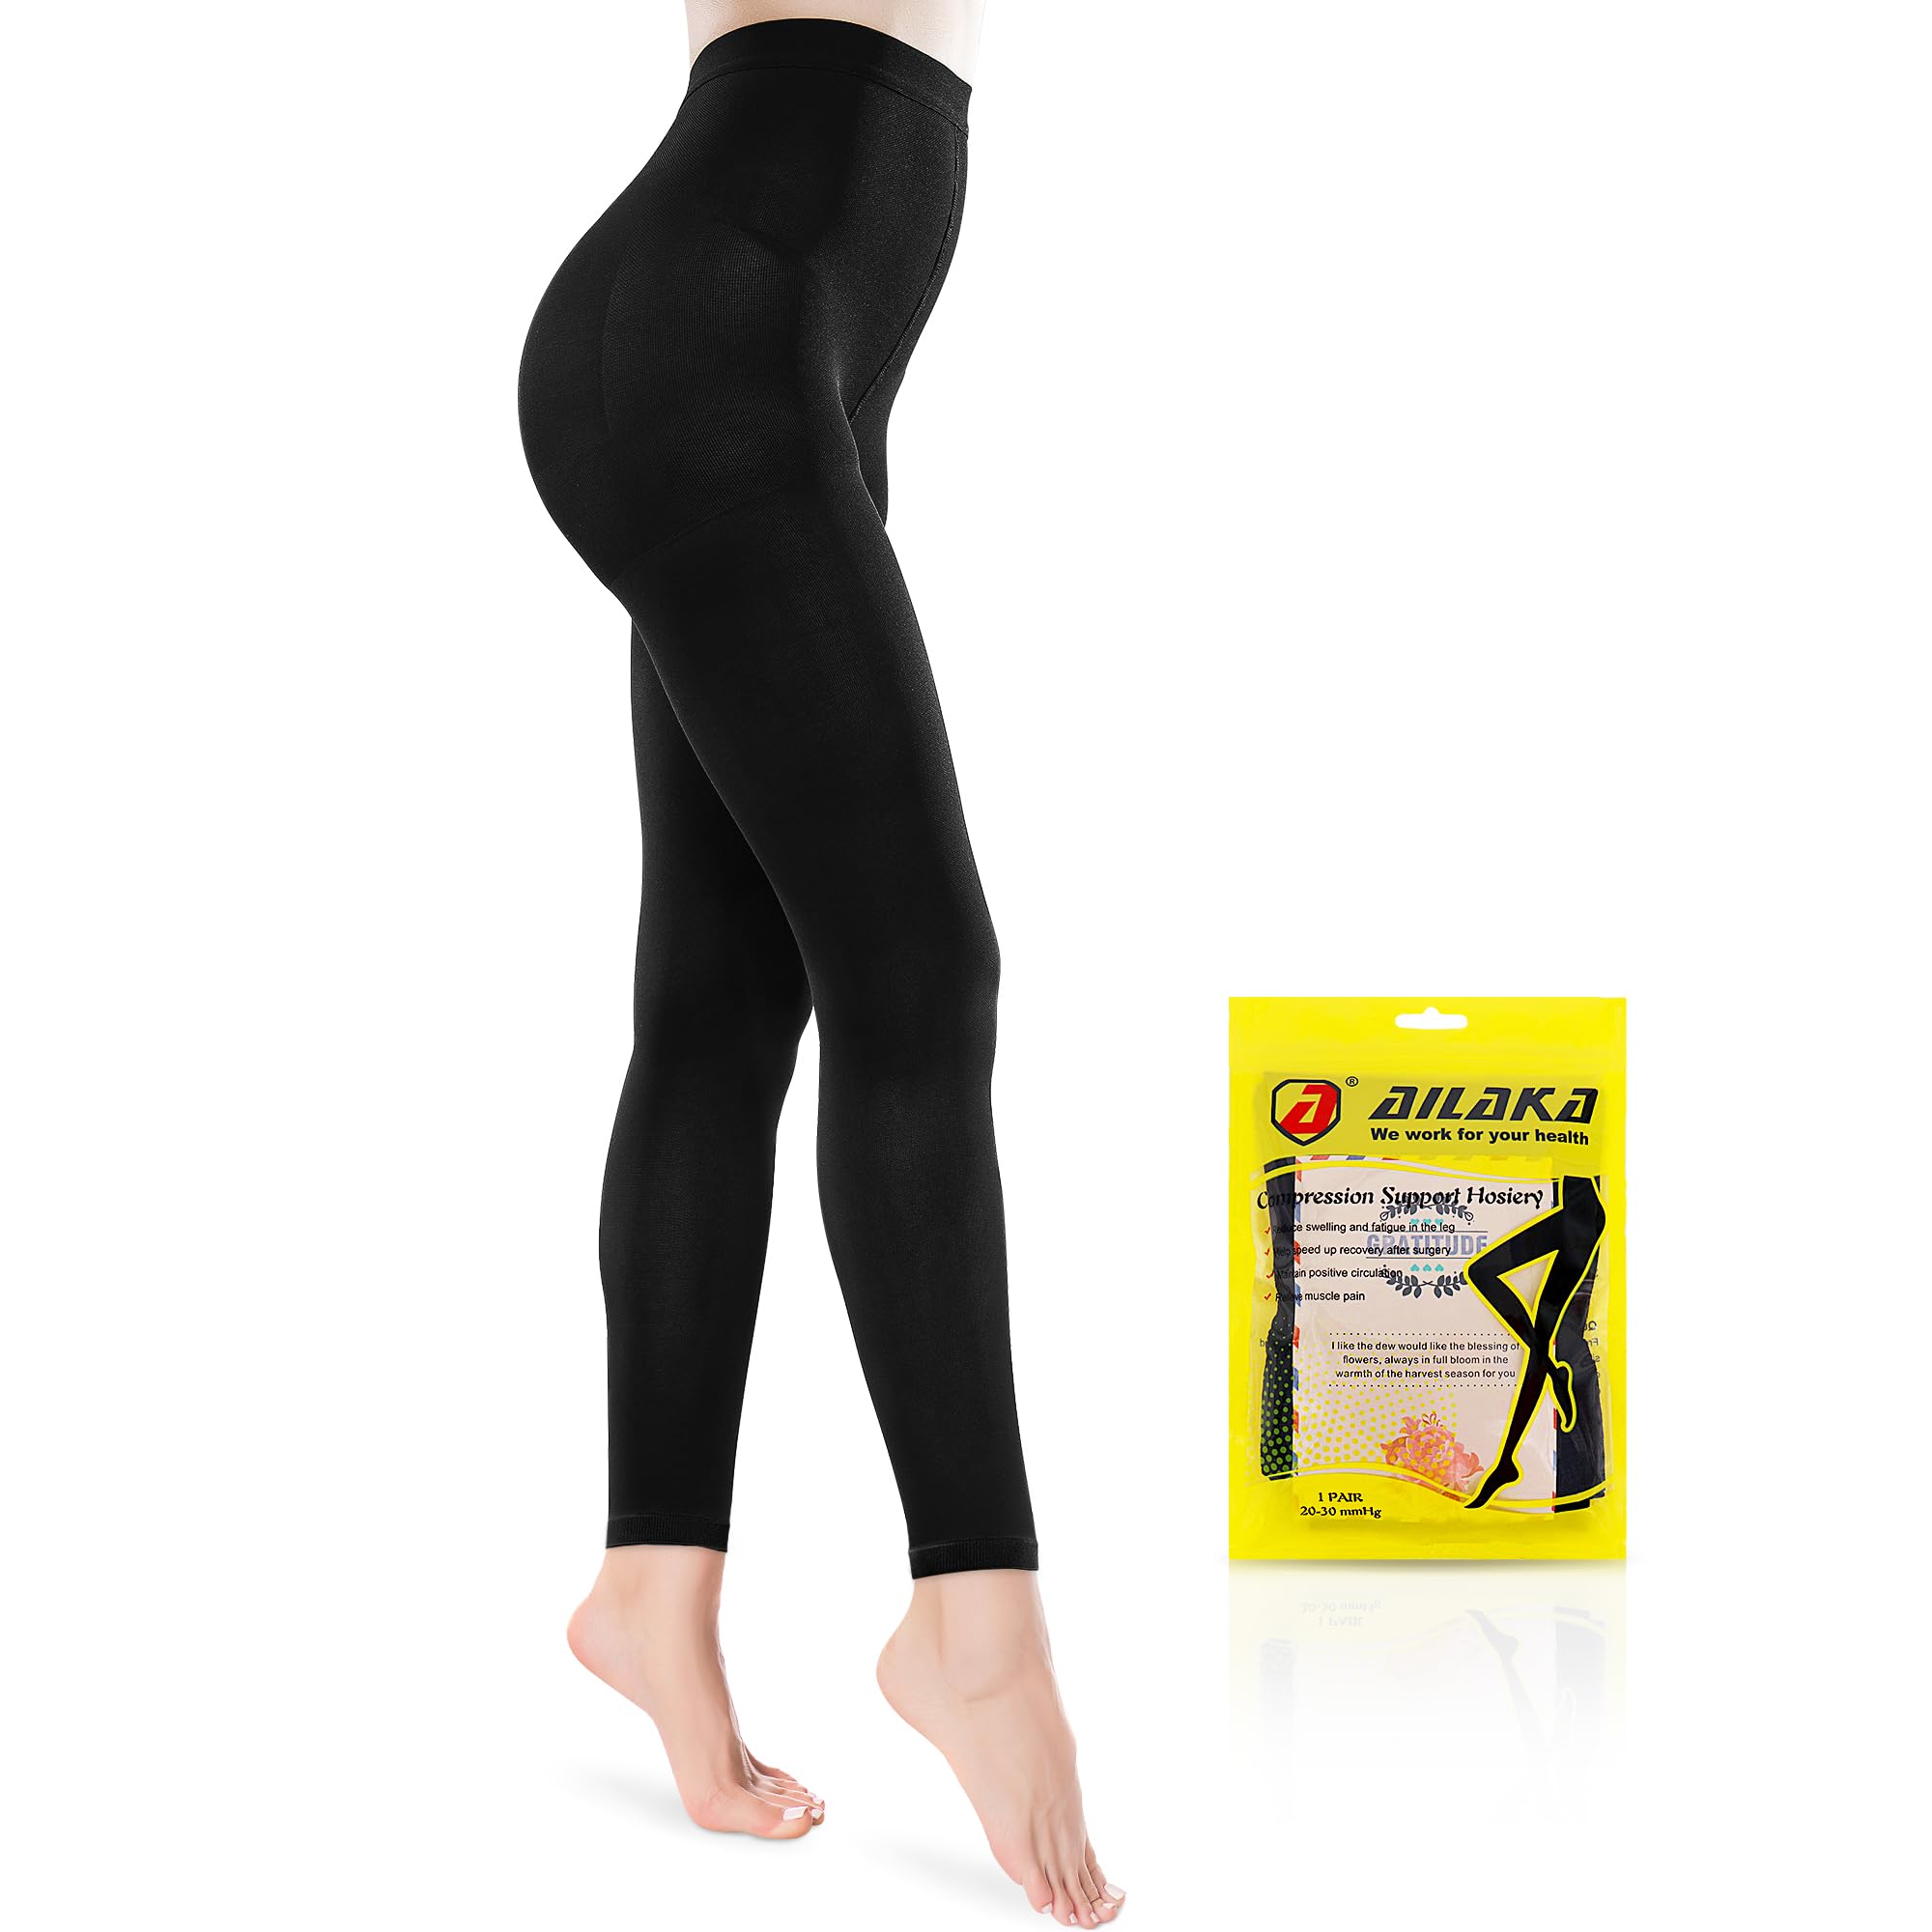 Women Compression Pantyhose 15-20 MmHg Graduated Support Stockings